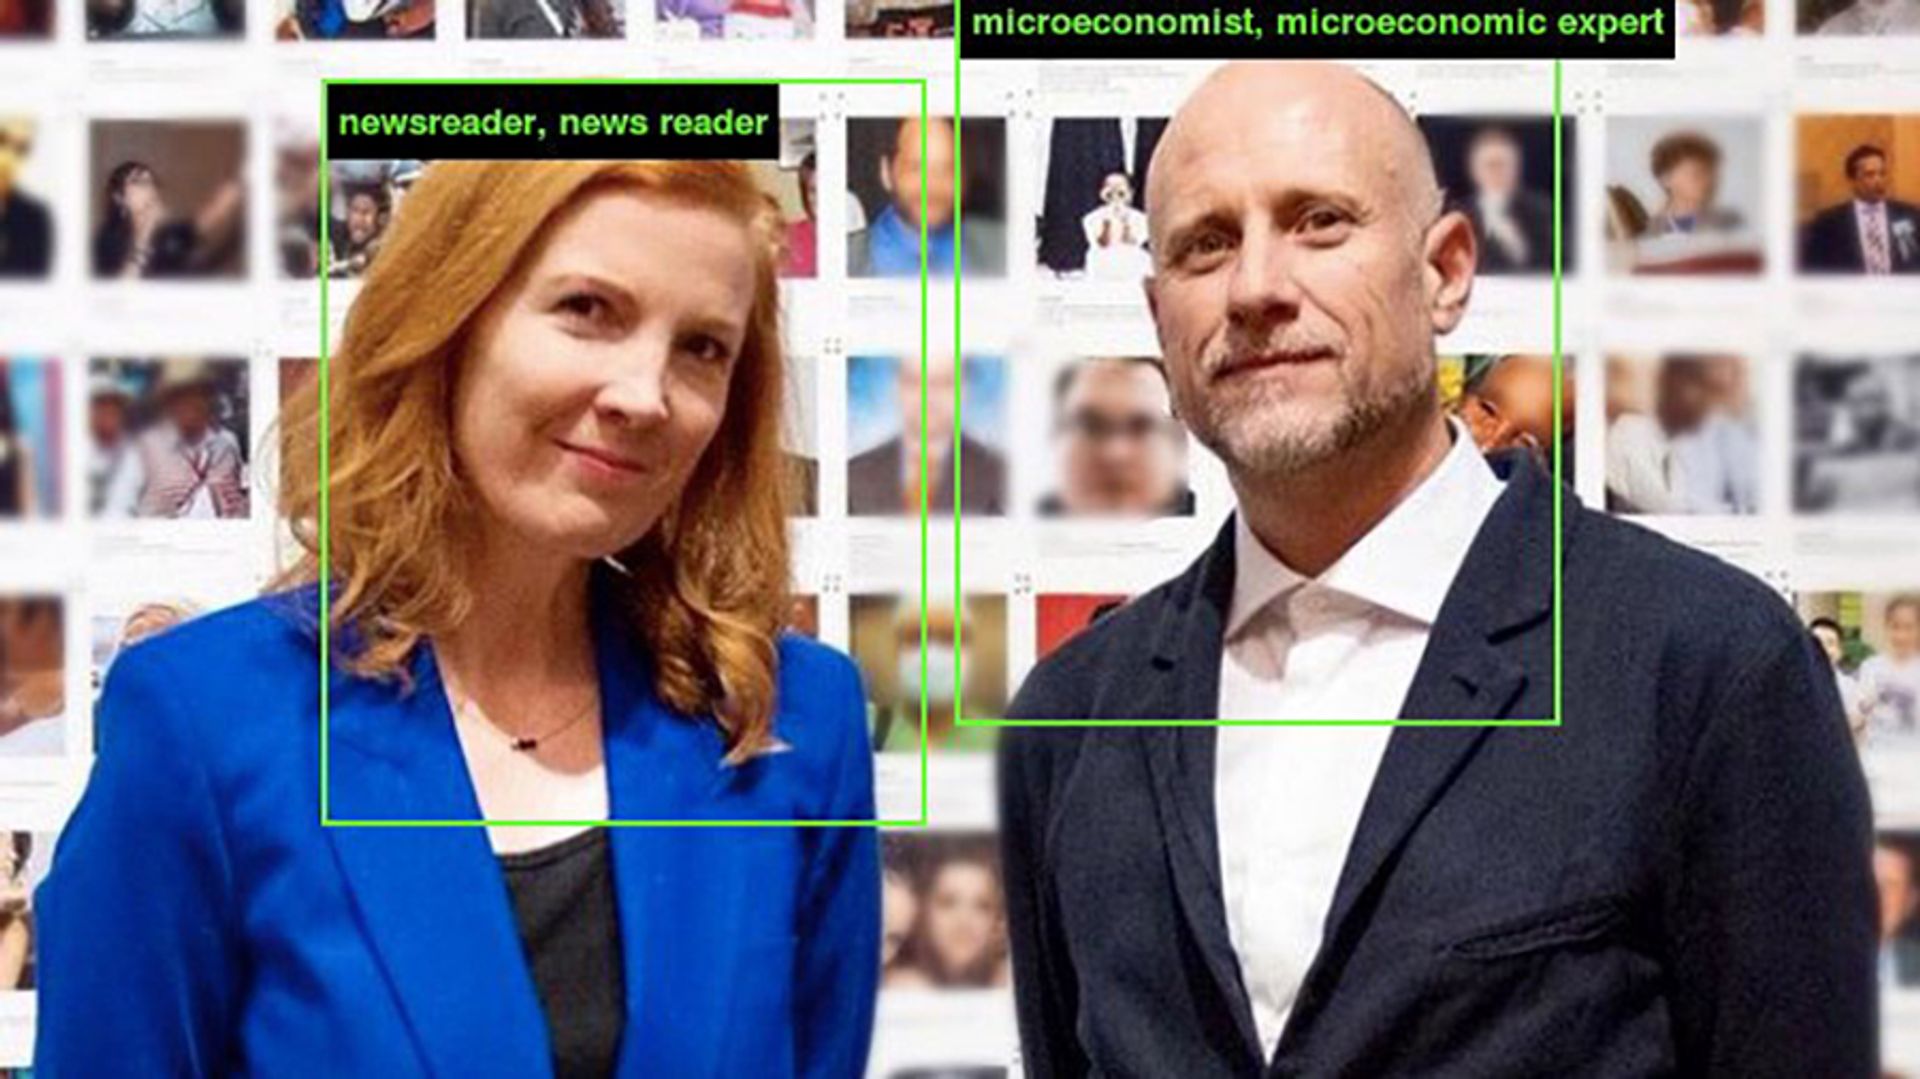 ImageNet Roulette was launched by the artist Trevor Paglen and the AI researcher Kate Crawford Courtesy: ImageNet Roulette